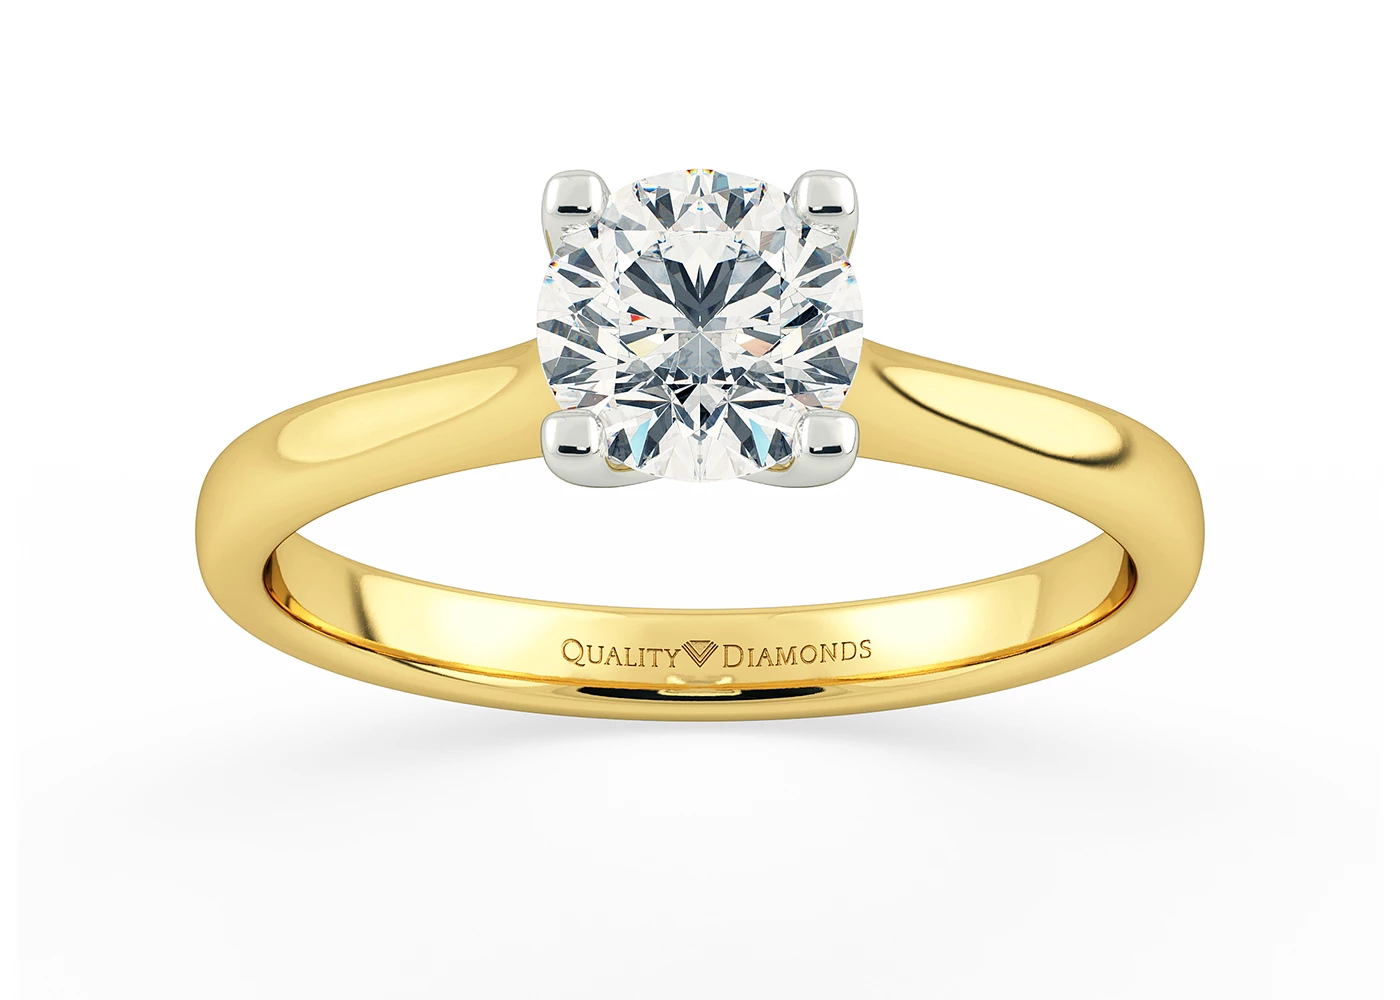 Round Brilliant Flor Diamond Ring in 18K Yellow Gold